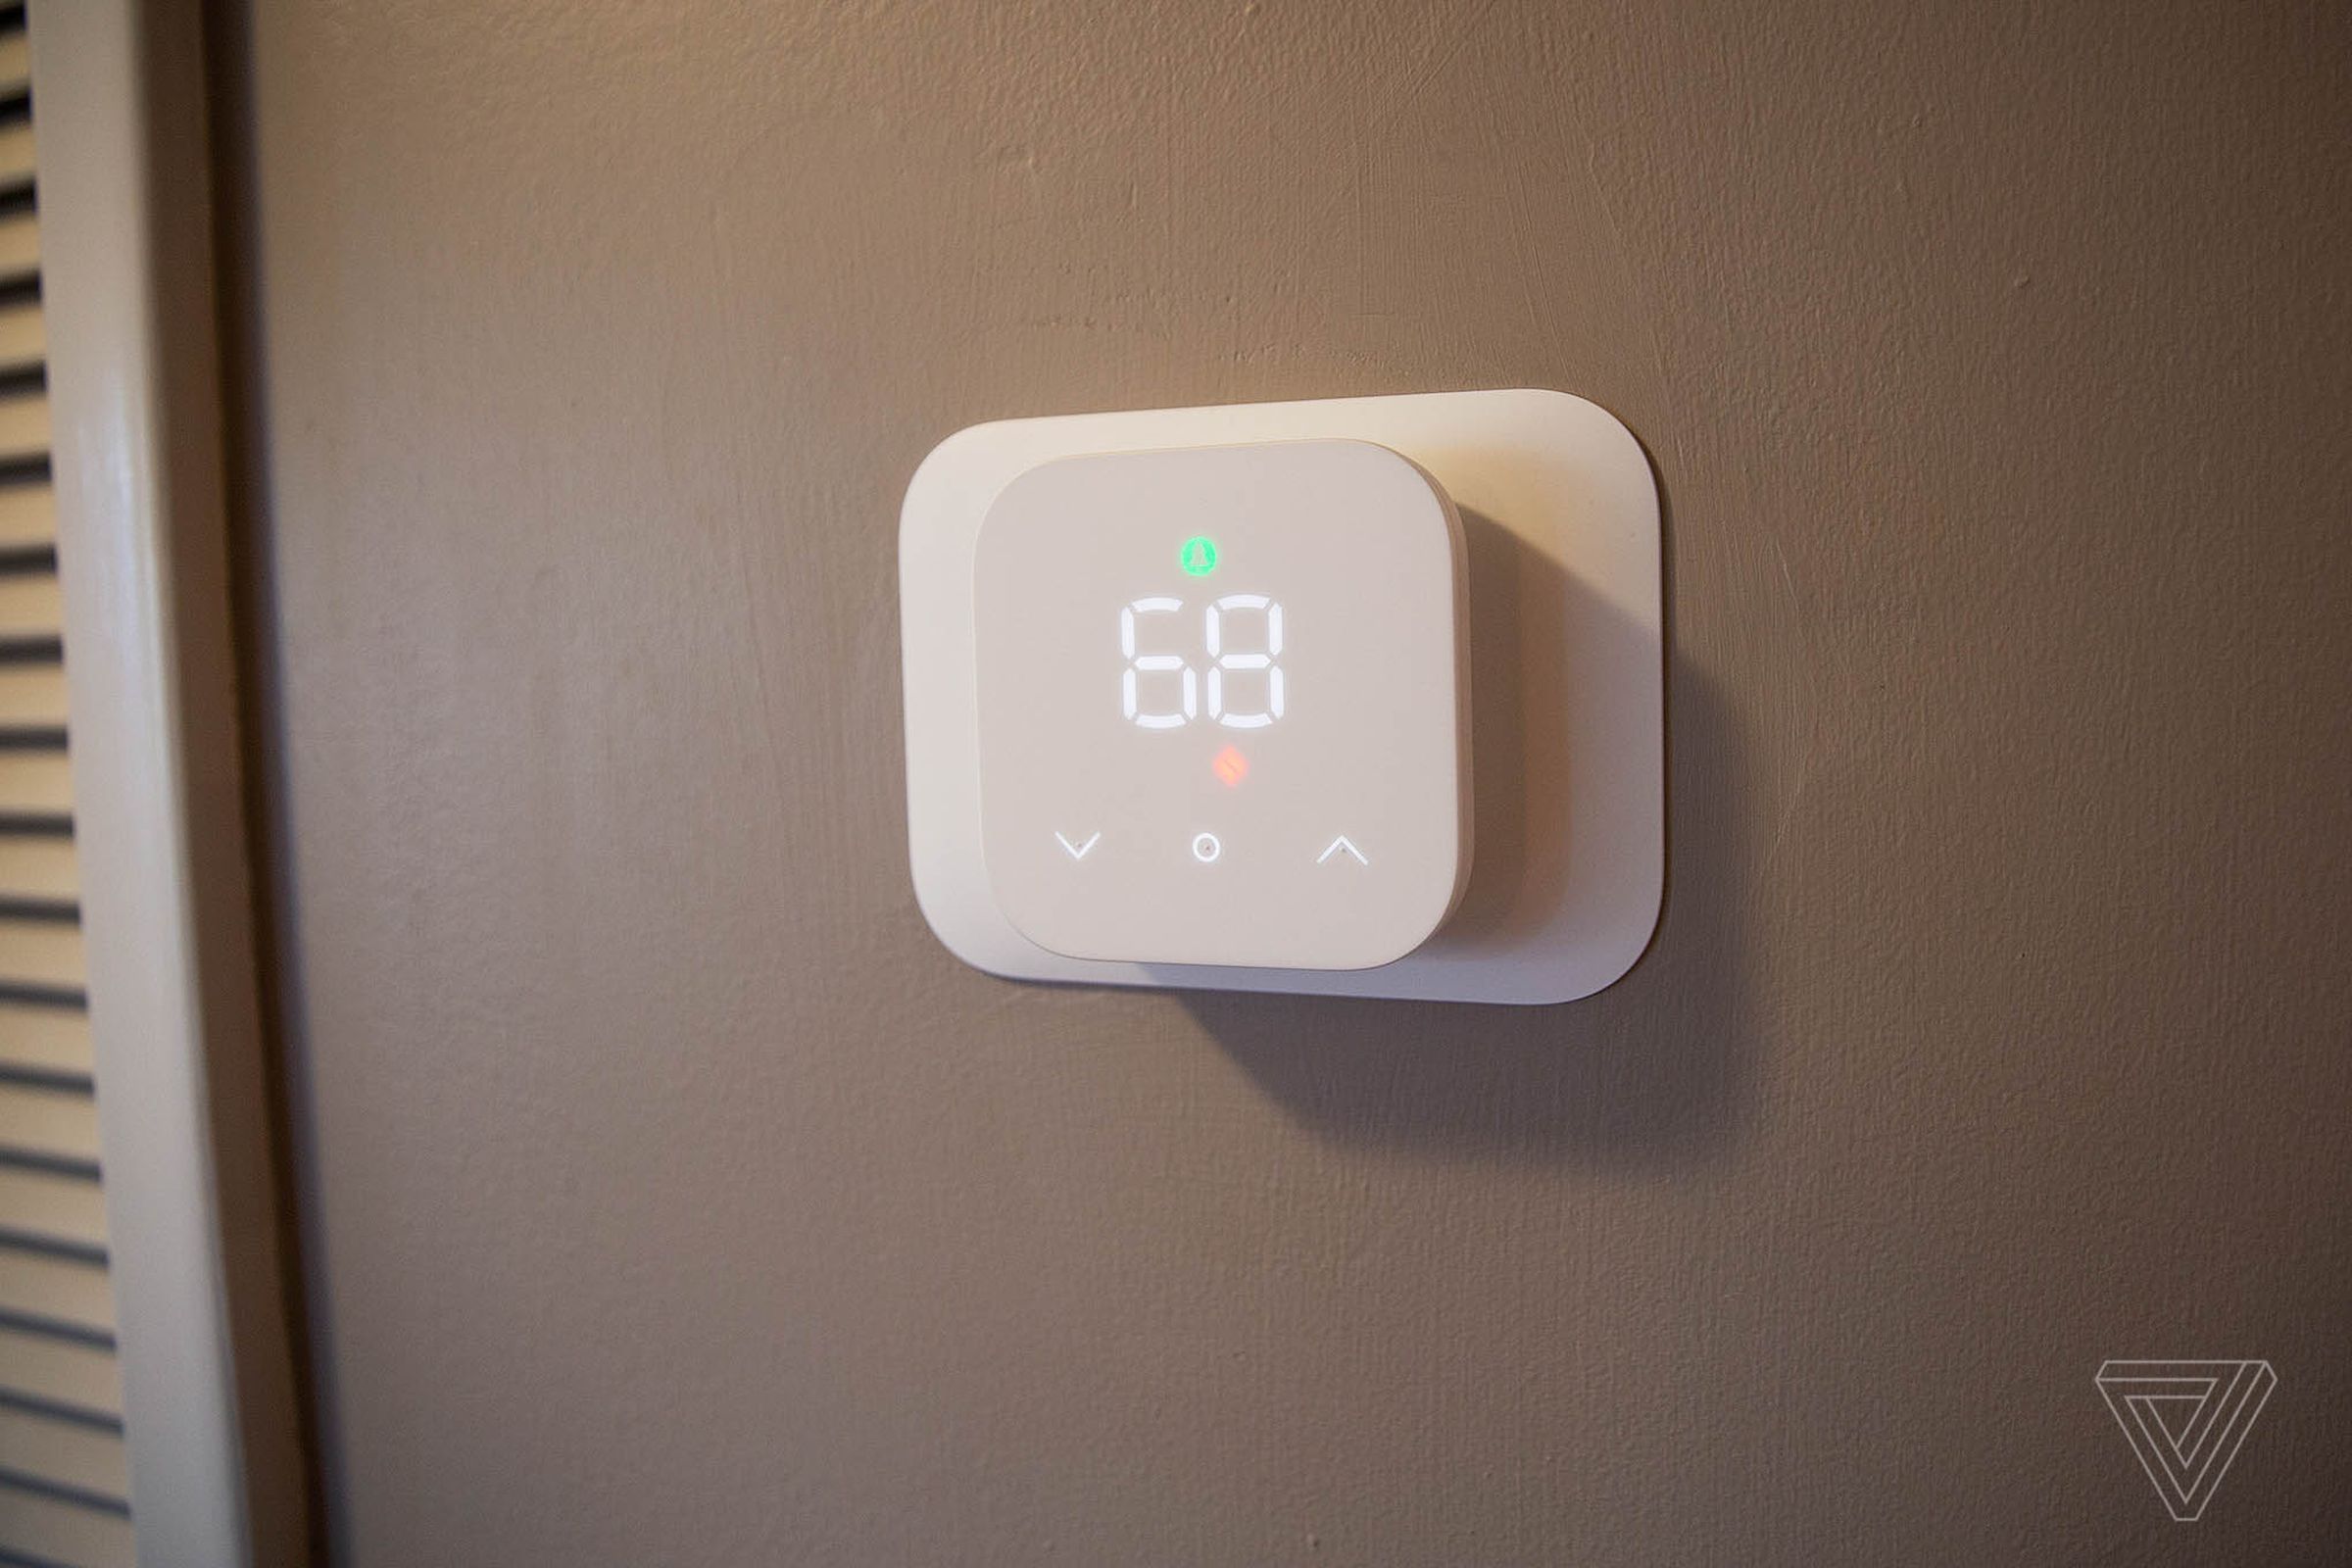 The Amazon Smart Thermostat mounted to a wall.